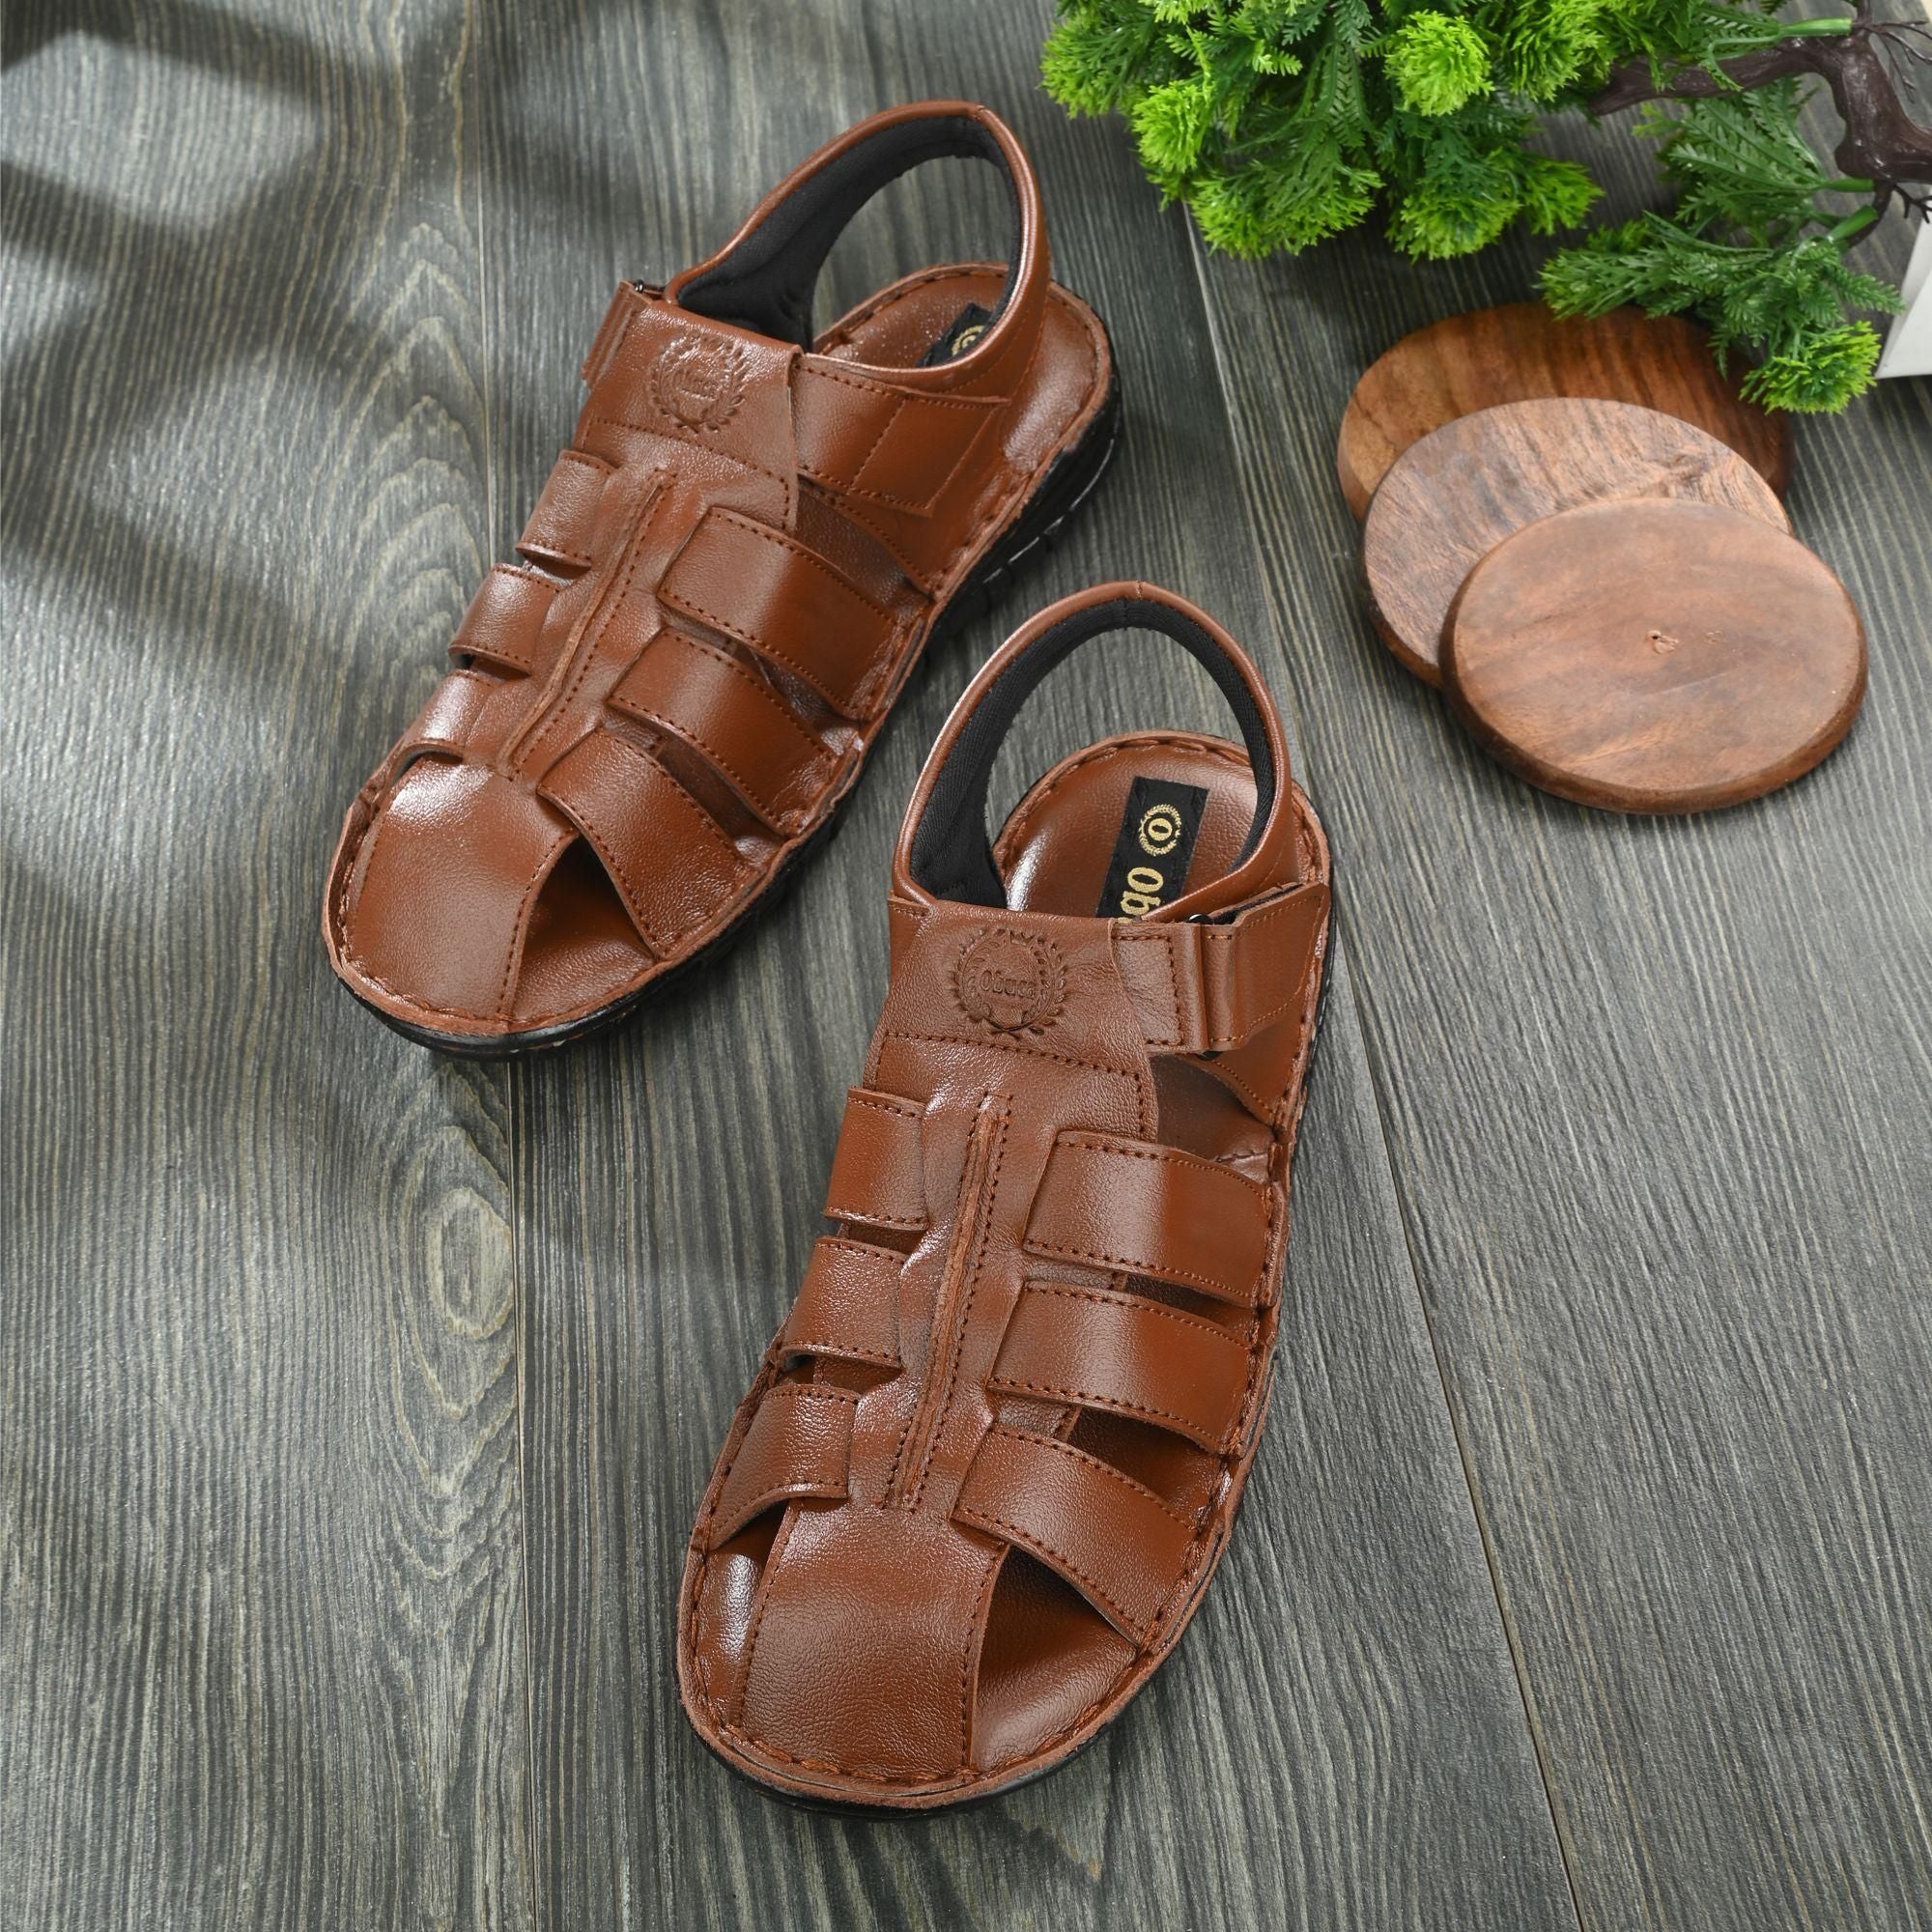 Men's PU Leather Brown Velcro Casual Sandal